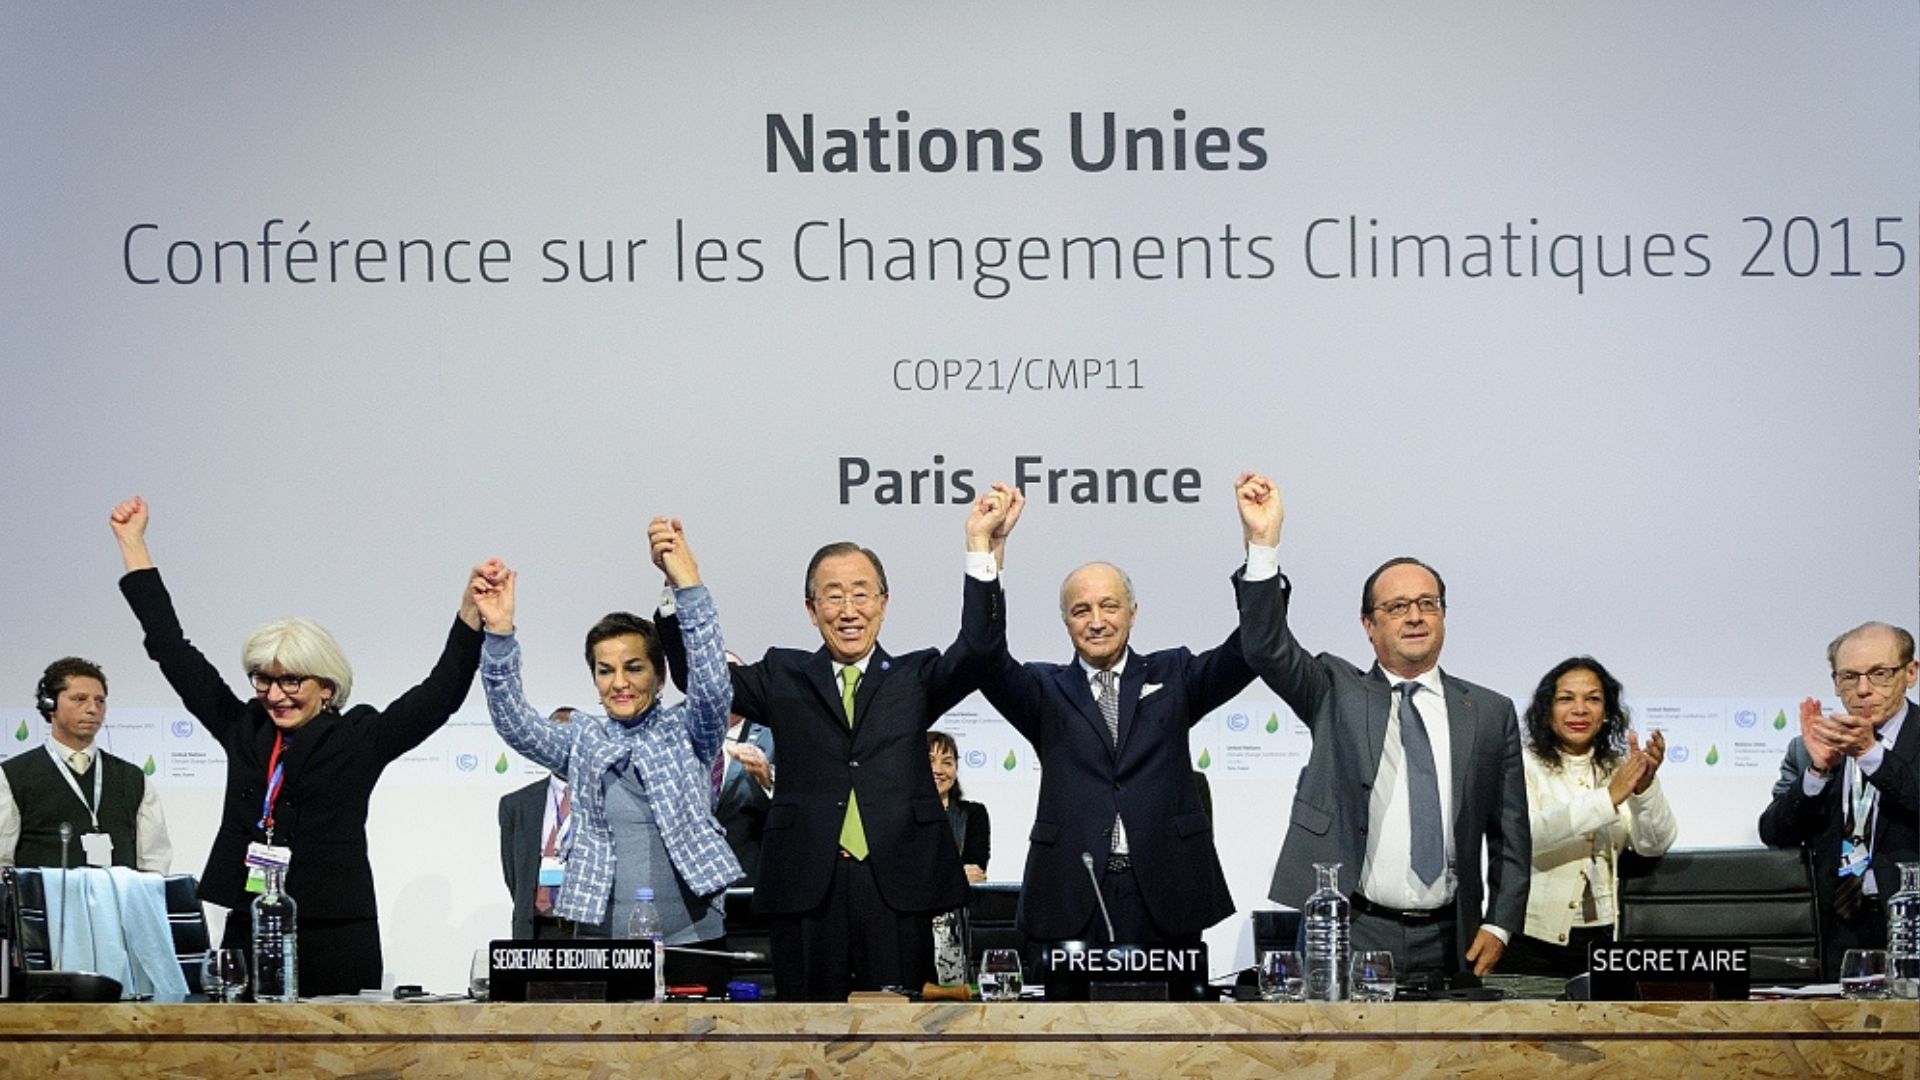 The celebratory atmosphere at the end of COP21 in Paris has not led to sustained change. /Arnaud BOUISSOU/COP21/Anadolu Agency/Getty Images)